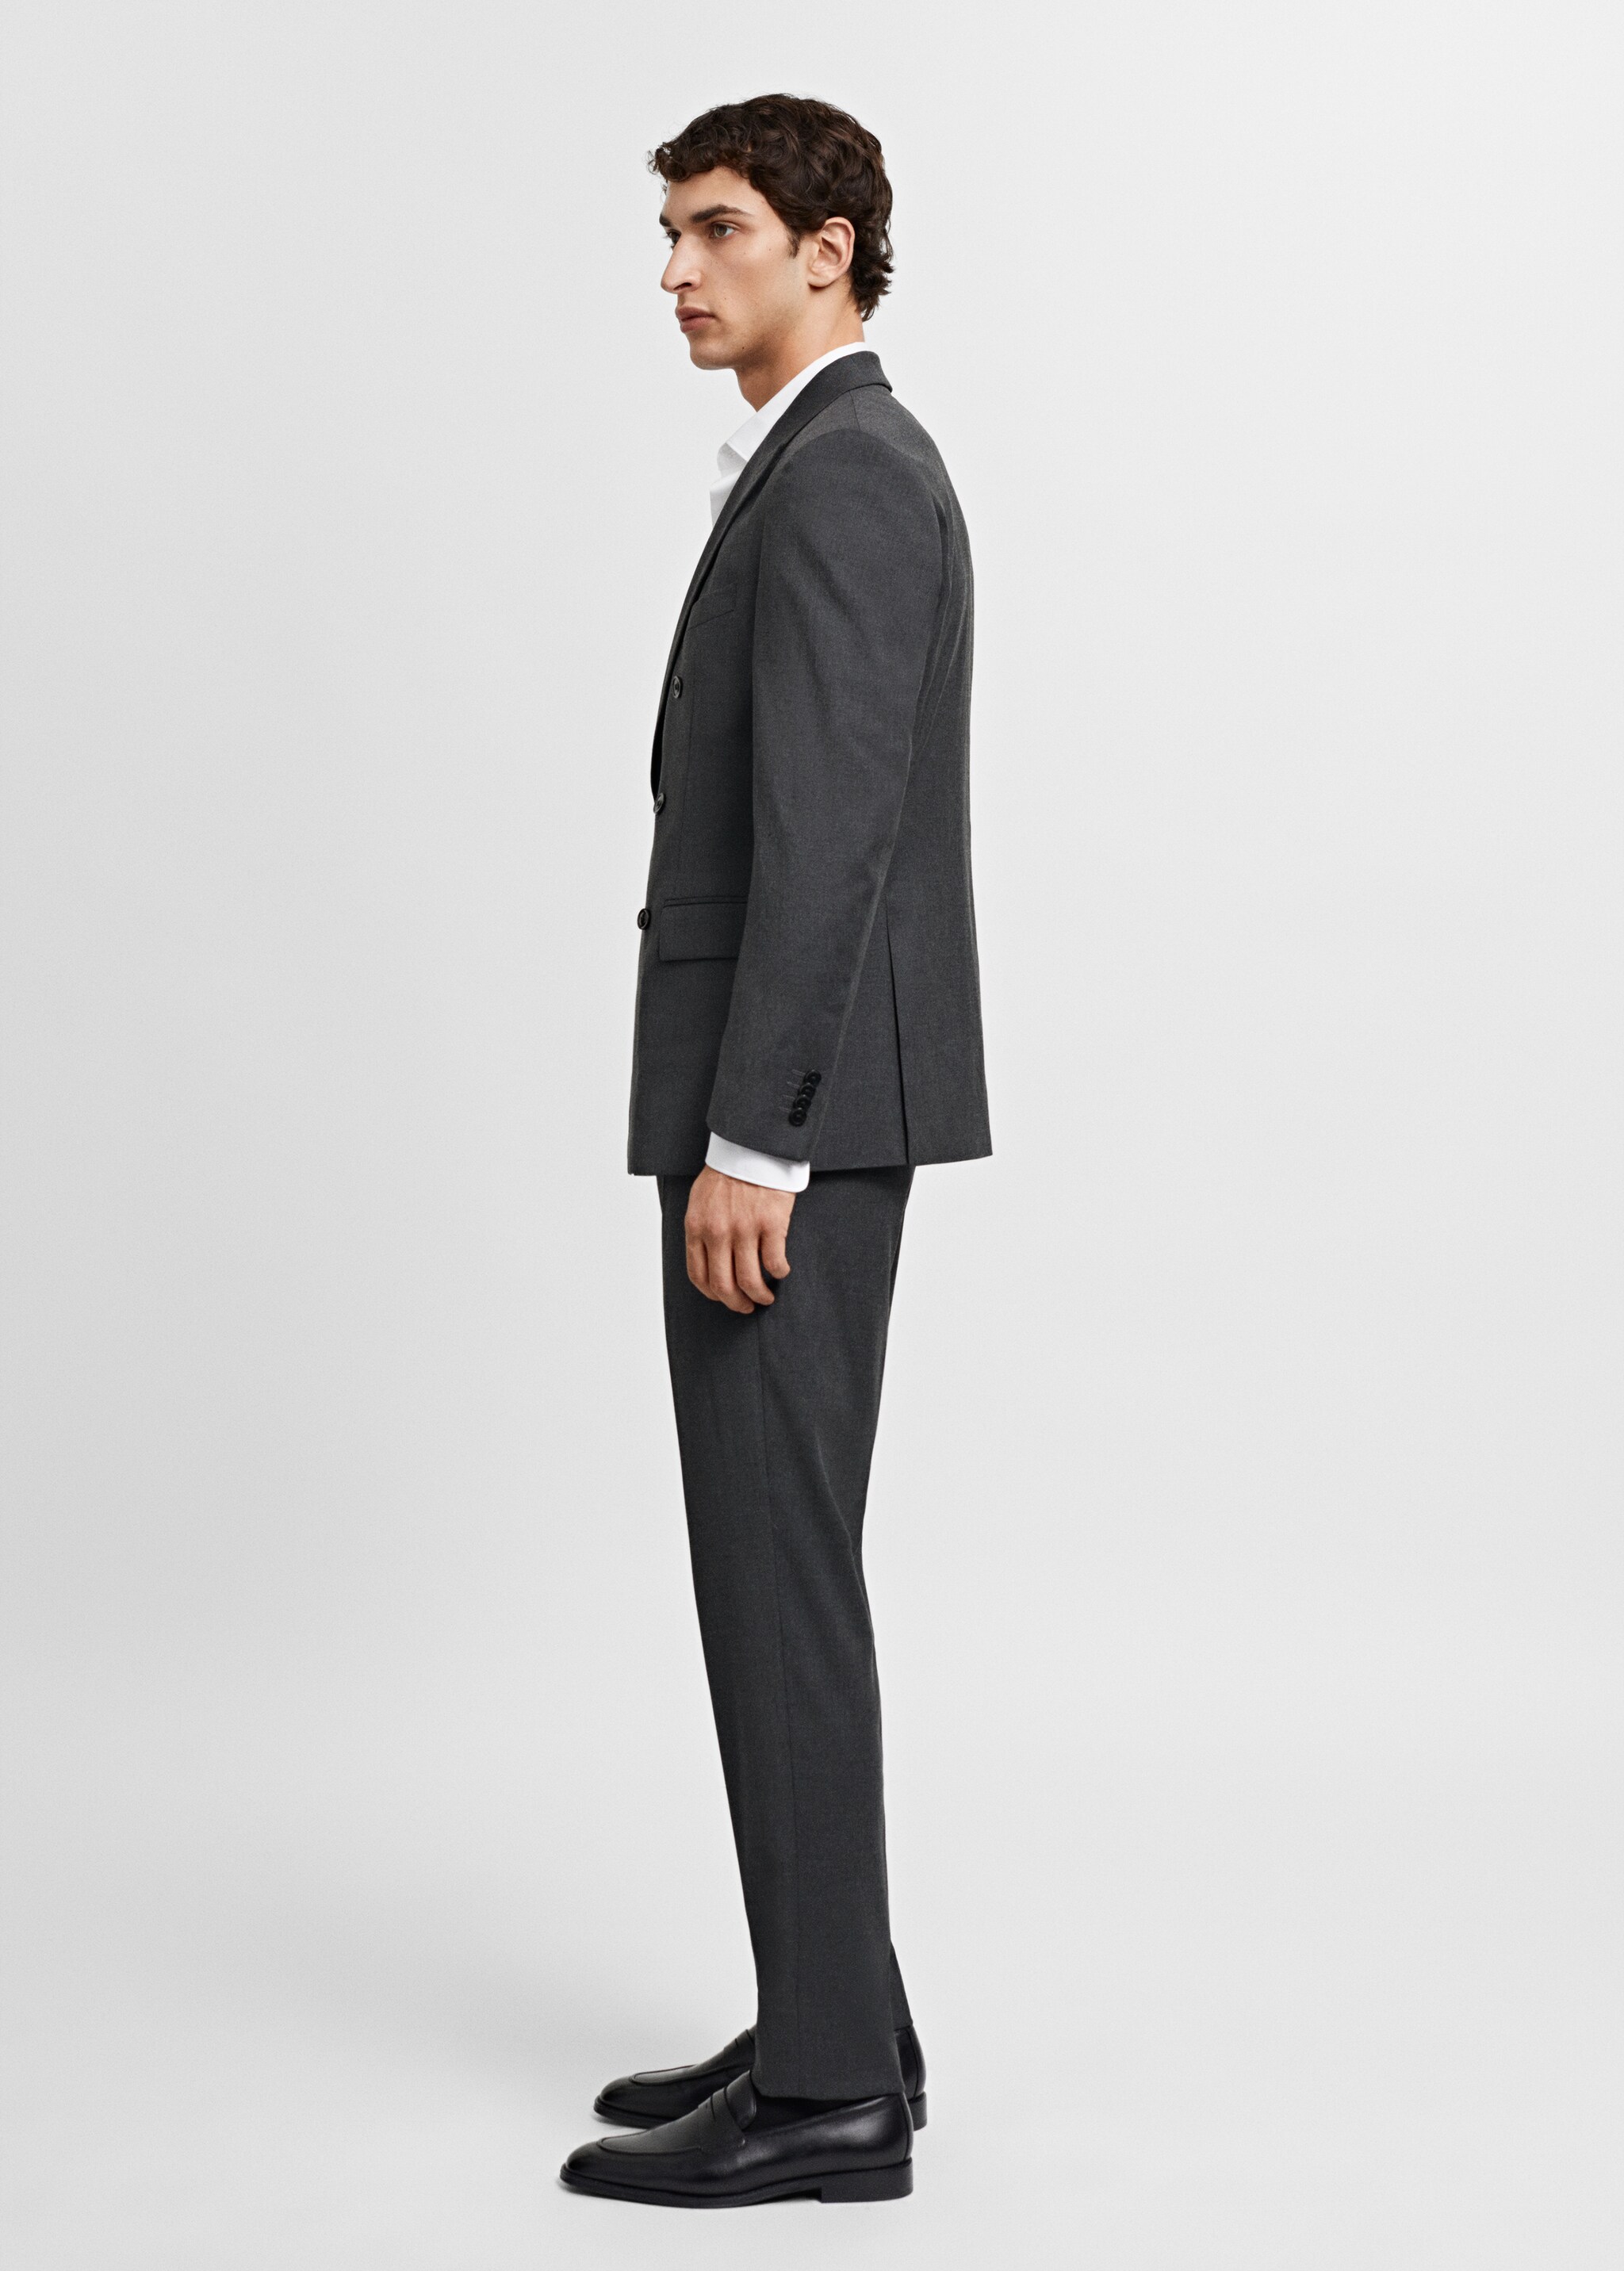  Suit trousers - Details of the article 2